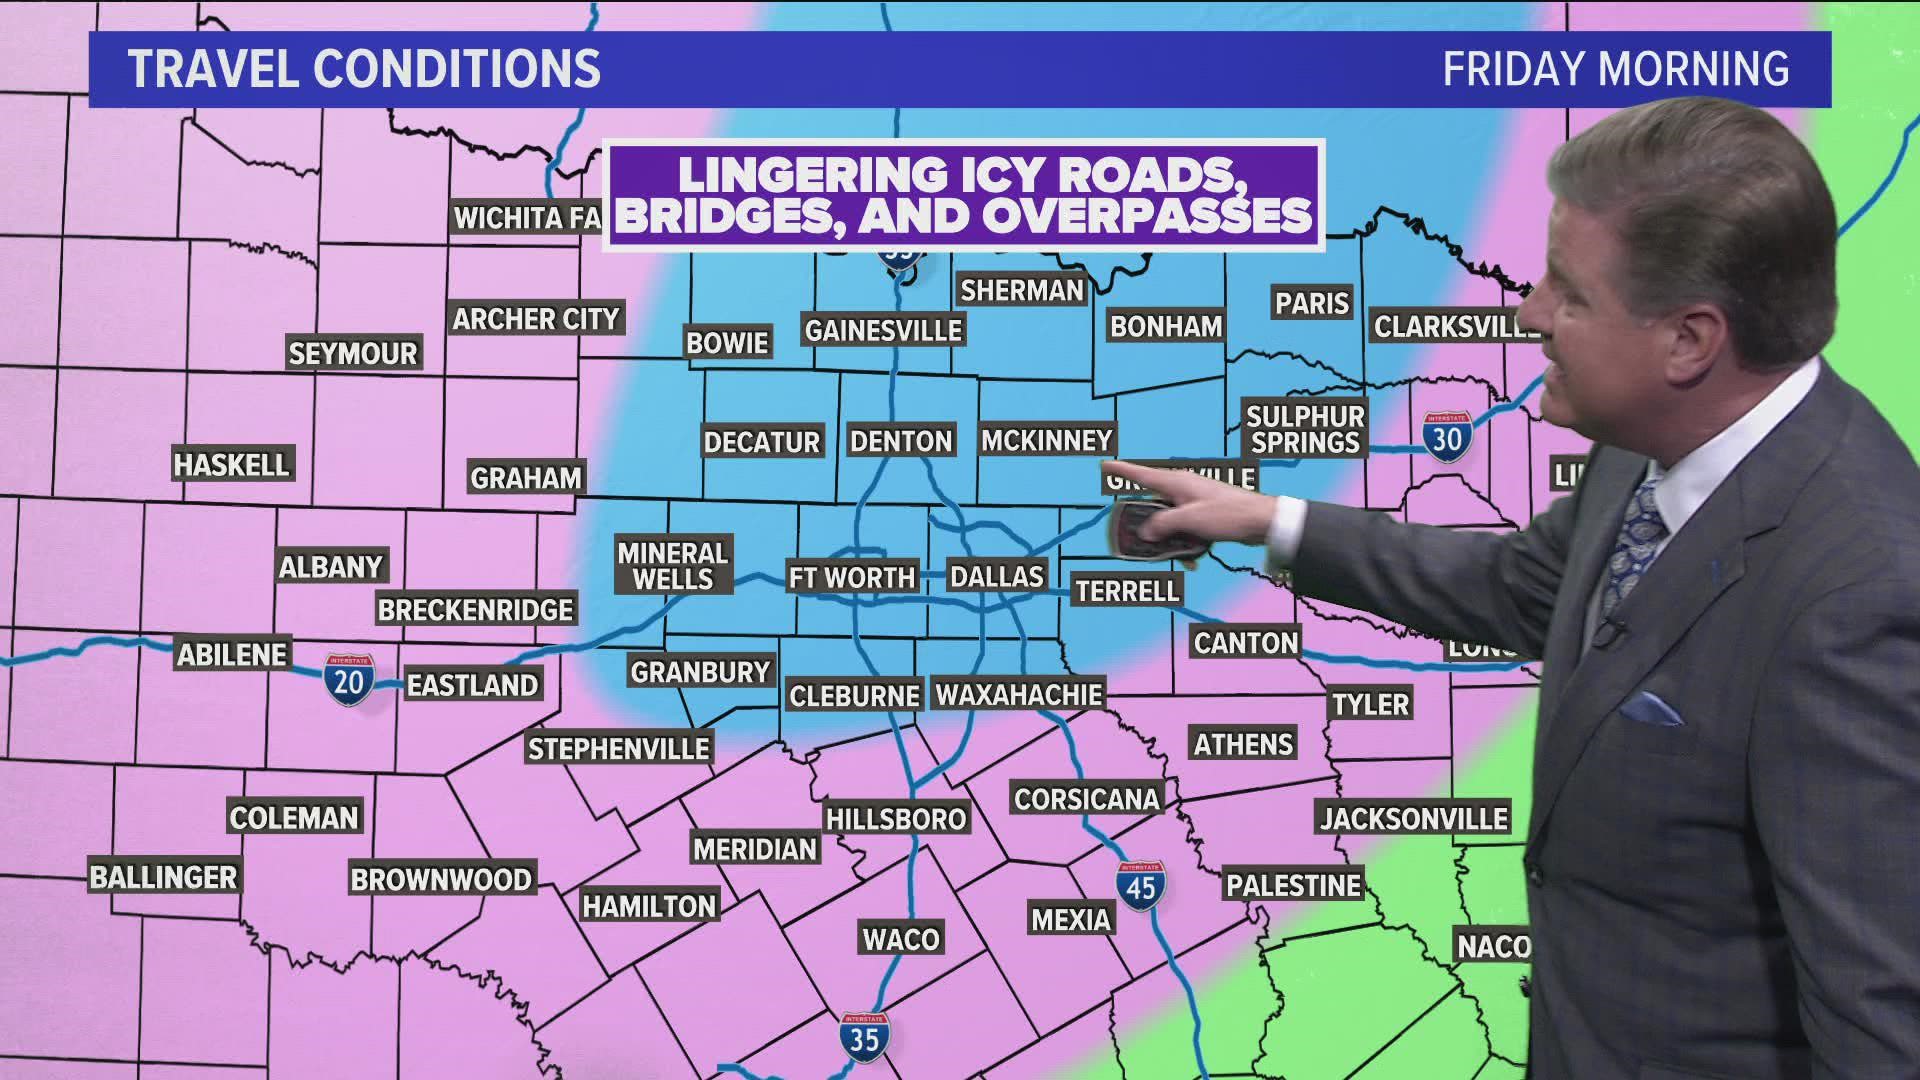 Some icy patches and slick spots could still be present on roads, bridges and overpasses Friday morning.